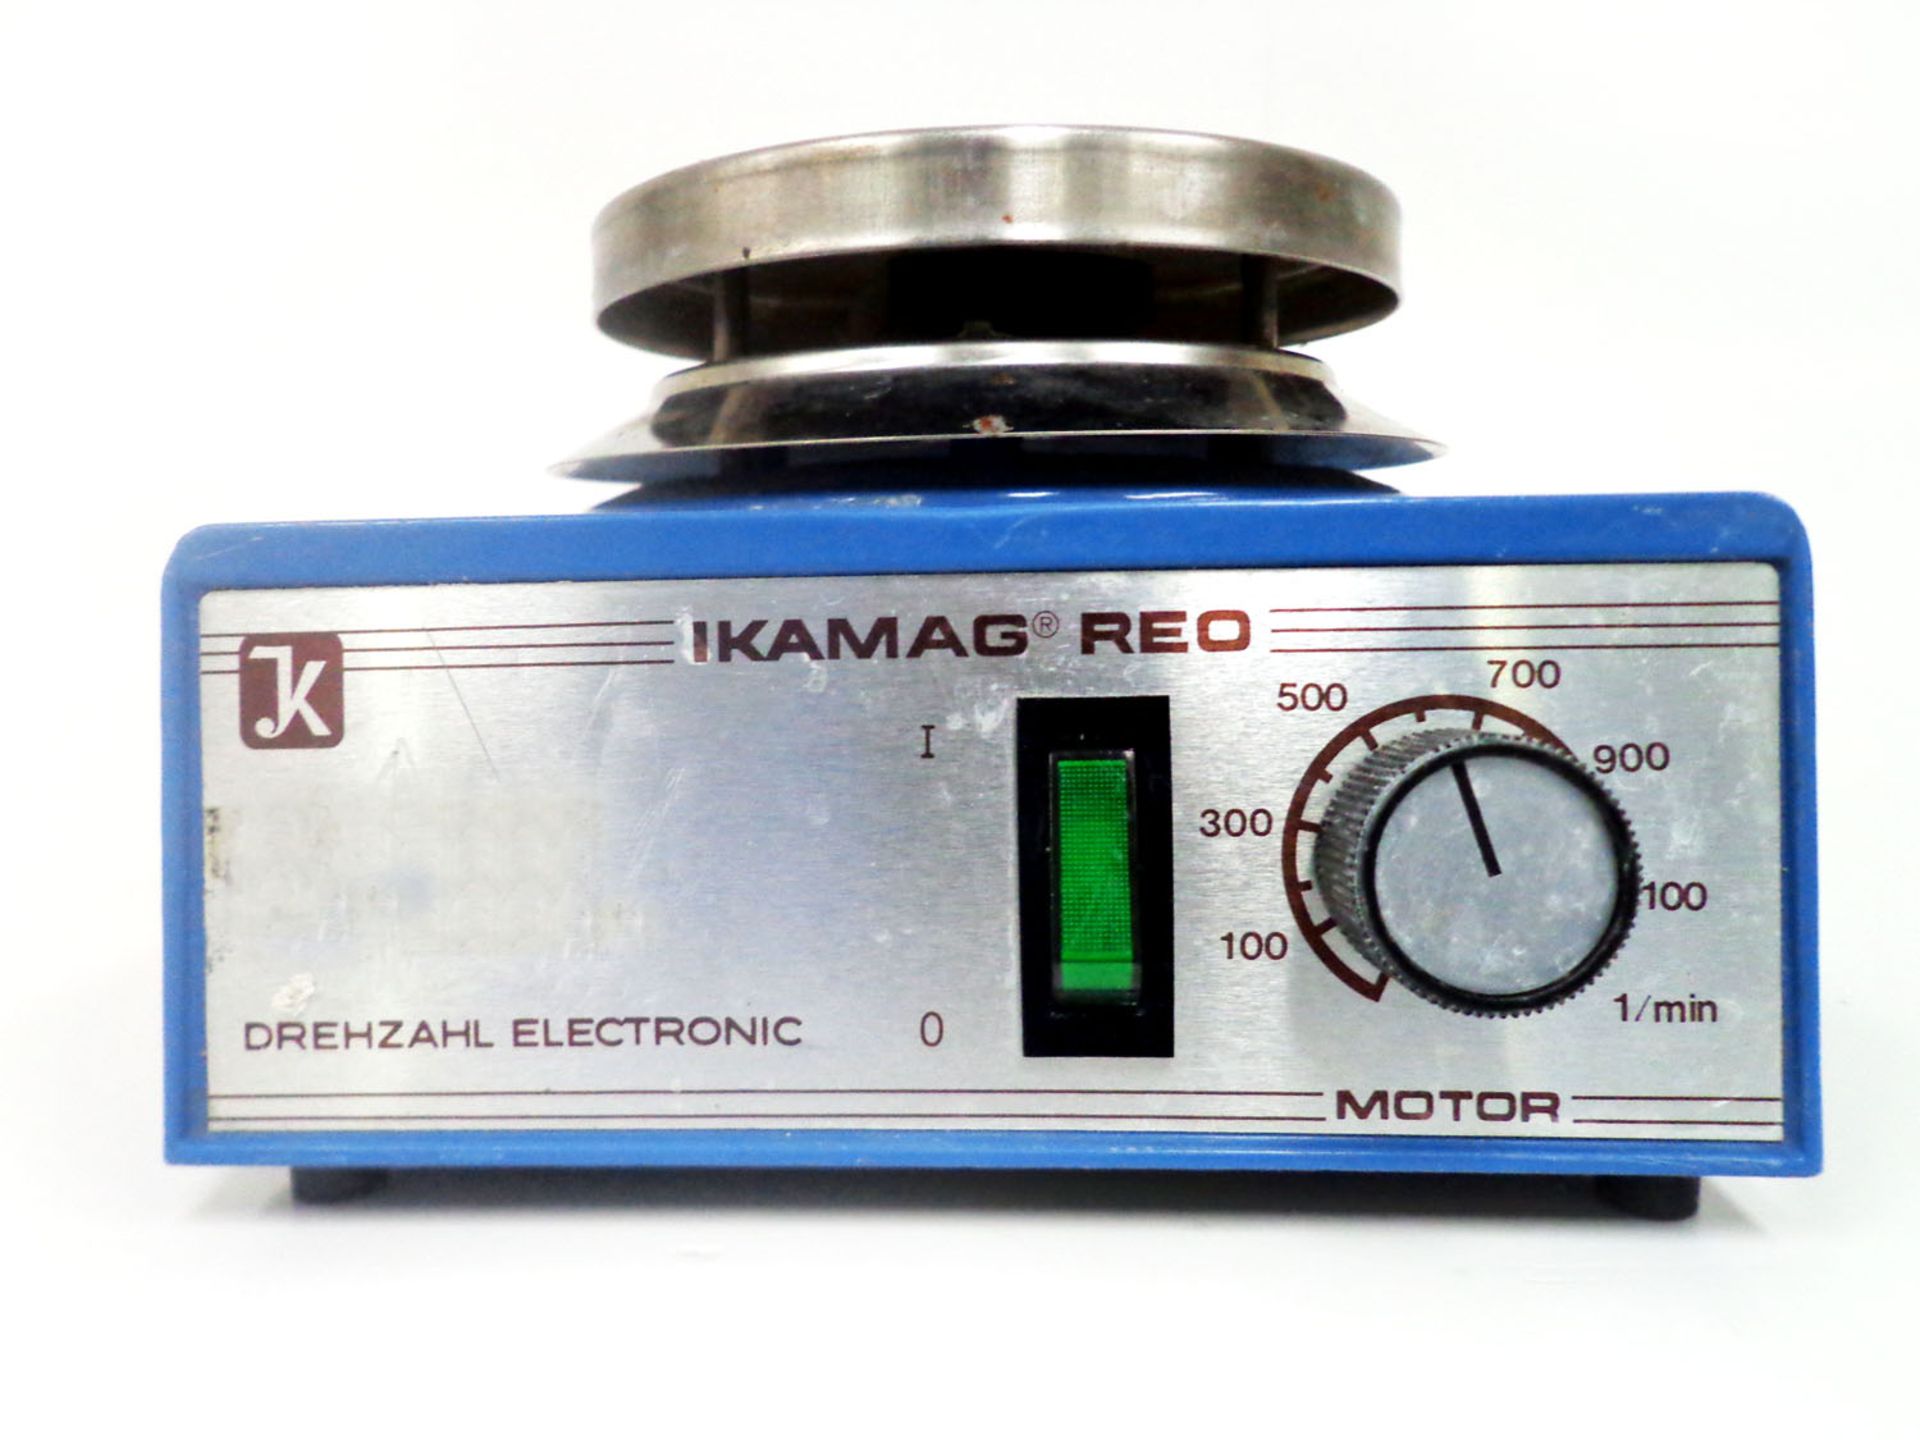 IKAMAG REO. 10412 Drehzahc Electronic magnetic stirrer, serial number 291470 (Ref: WA10650) - Image 4 of 5